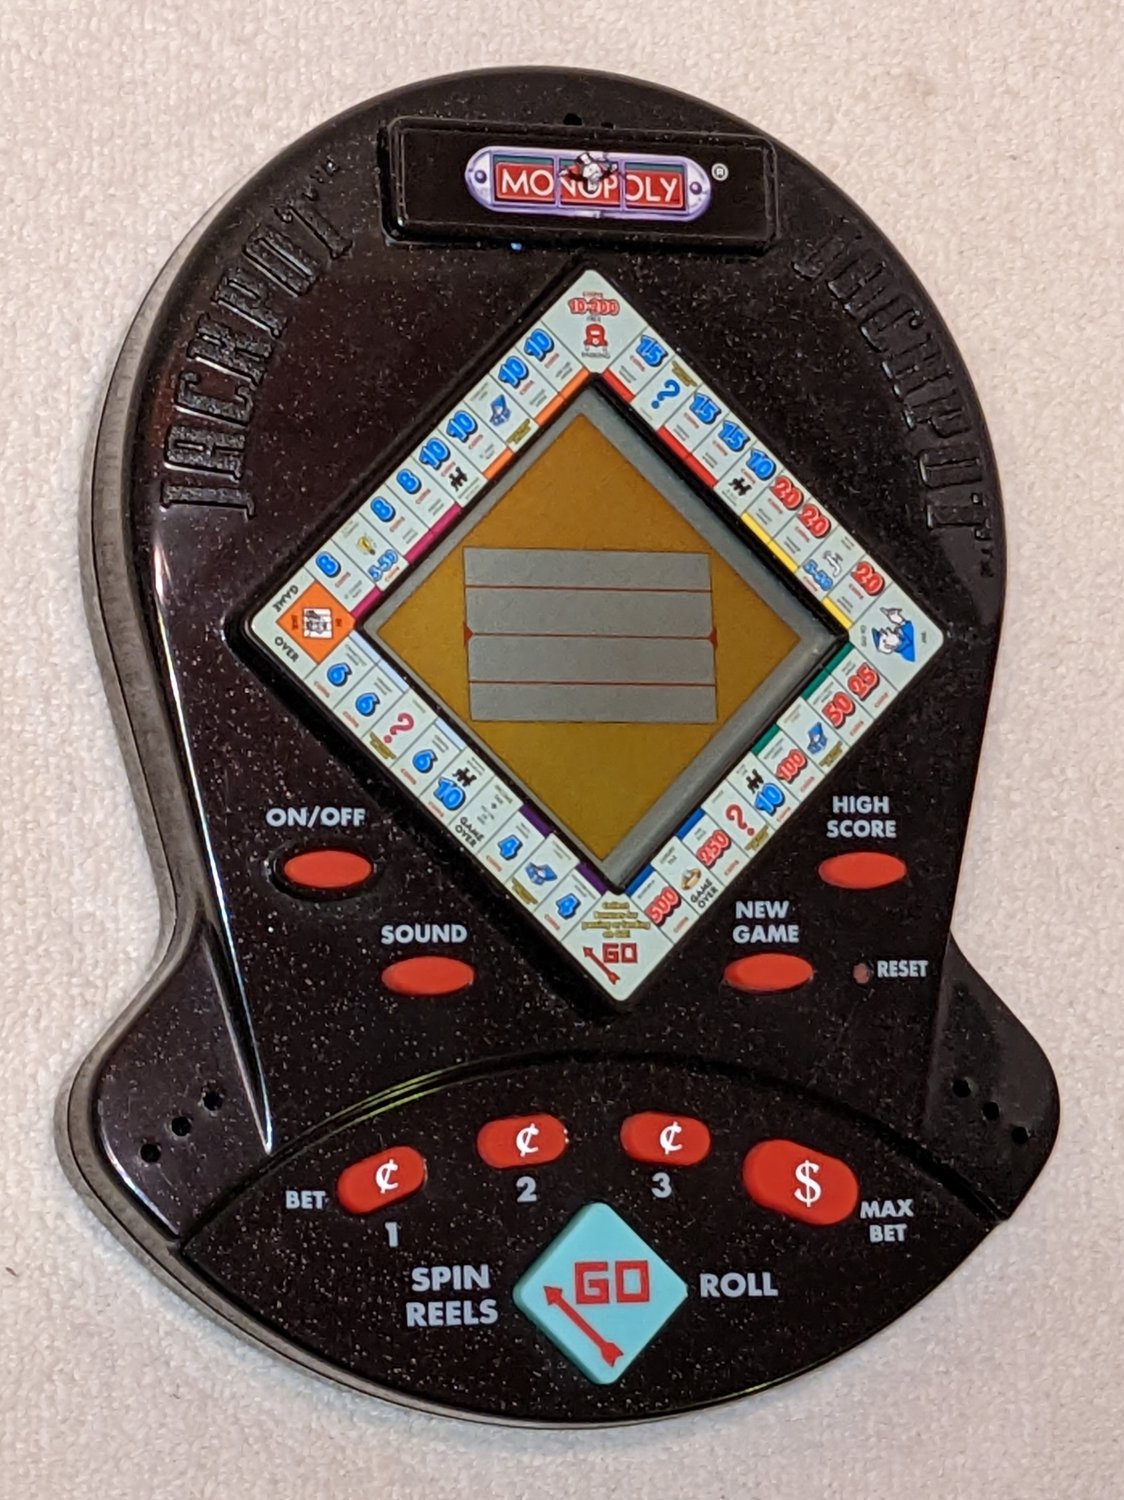 Monopoly Jackpot Electronic Handheld Game 41321-1 Battery Operated Working Condition 1999